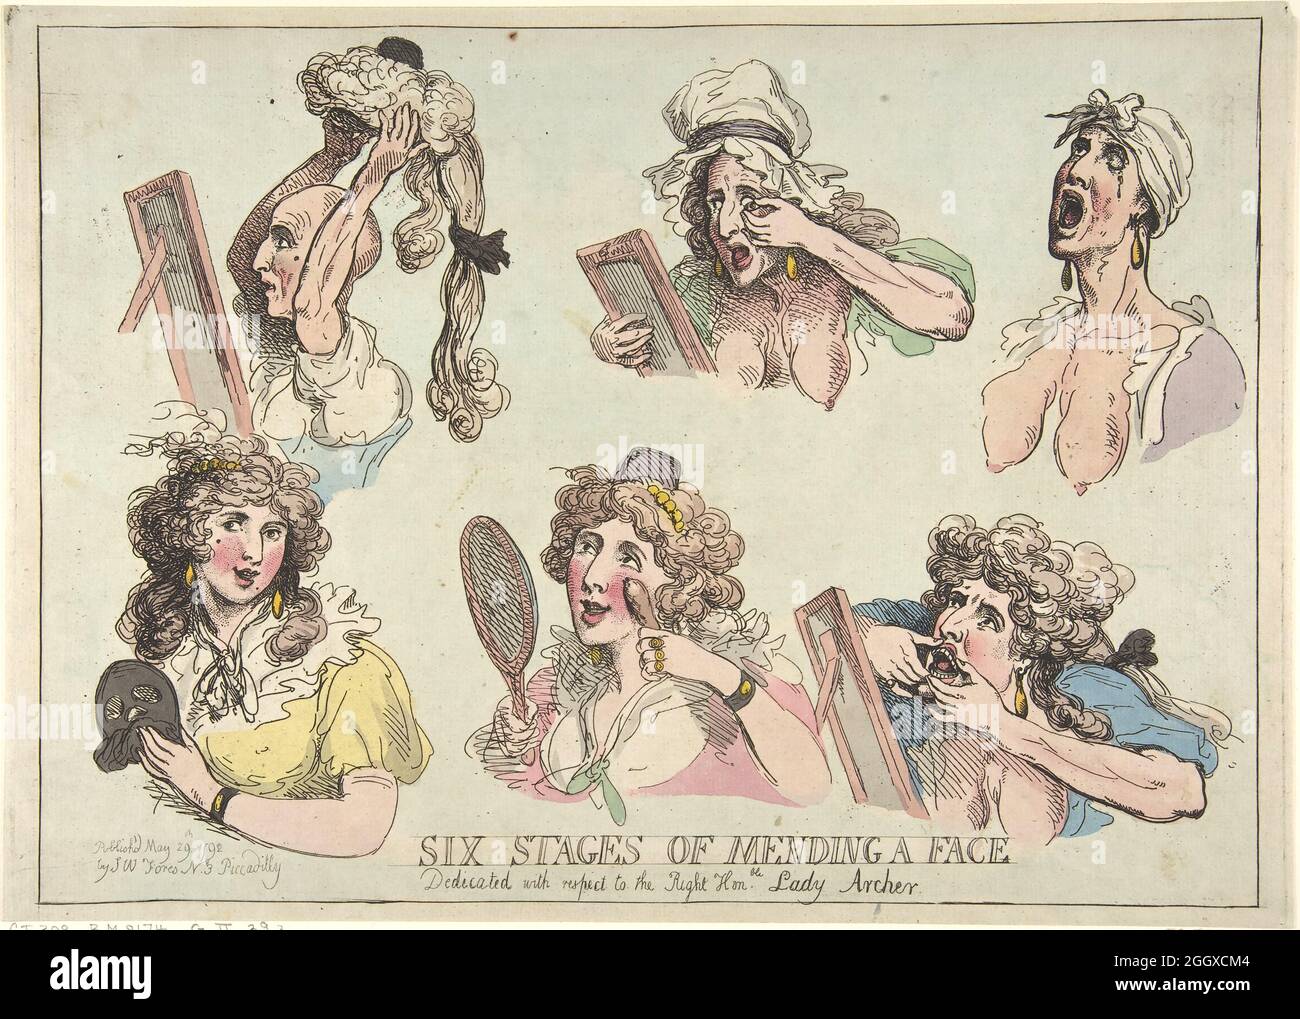 Six stages of mending a face 1792 Lady Archer Artist: Thomas Rowlandson (1756-1827) an English artist and caricaturist of the Georgian Era. A social observer, he was a prolific artist and print maker.  Credit: Levenson Collection/Alamy Stock Photo